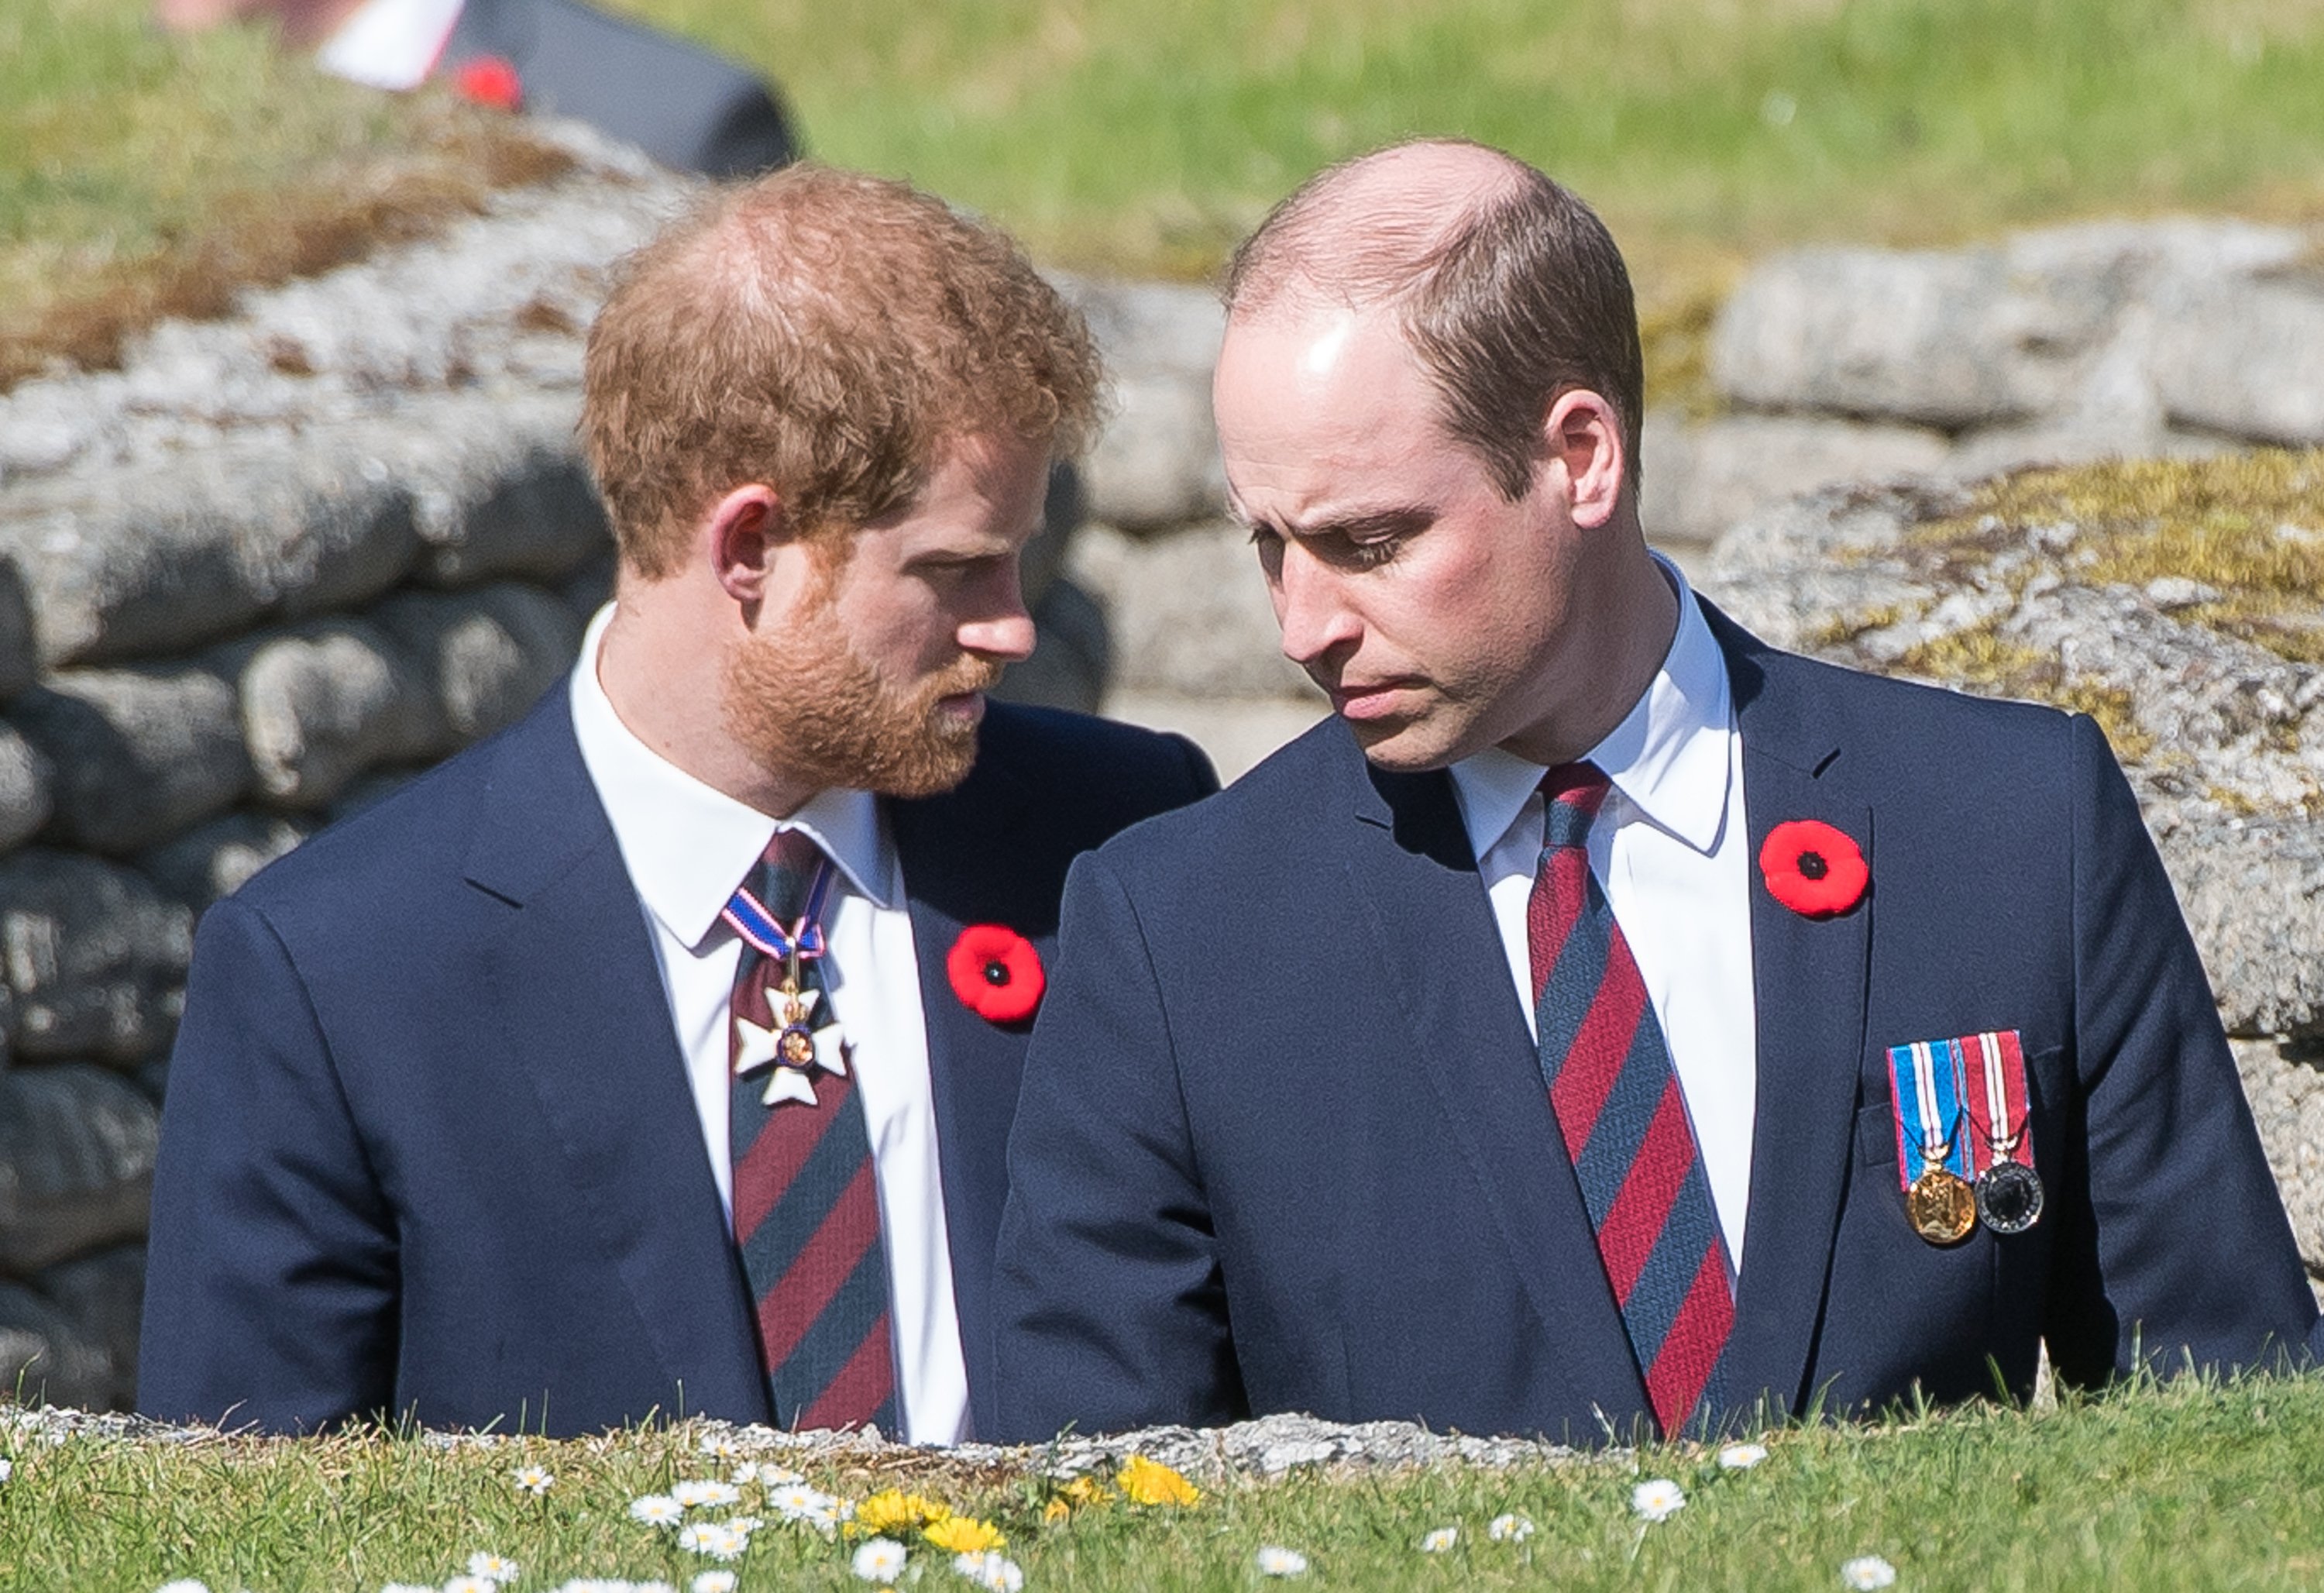 Prince William and Prince Harry during the commemorations for the 100th anniversary of the battle of Vimy Ridge on April 9, 2017 in Lille, France. | Source: Getty Images